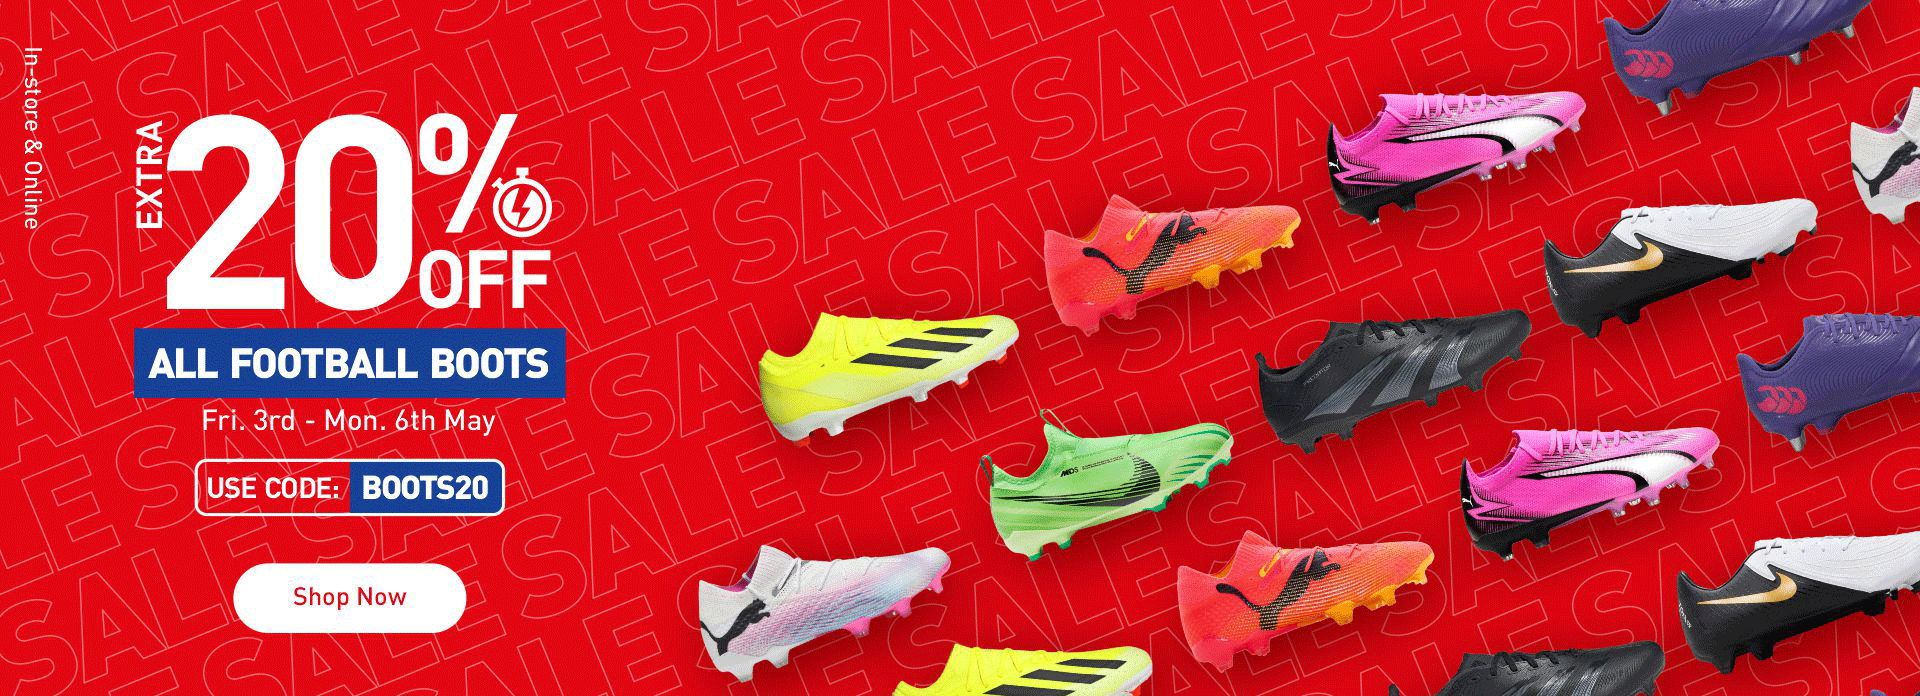 Football Boots 4-Day Sale | Intersport Elverys